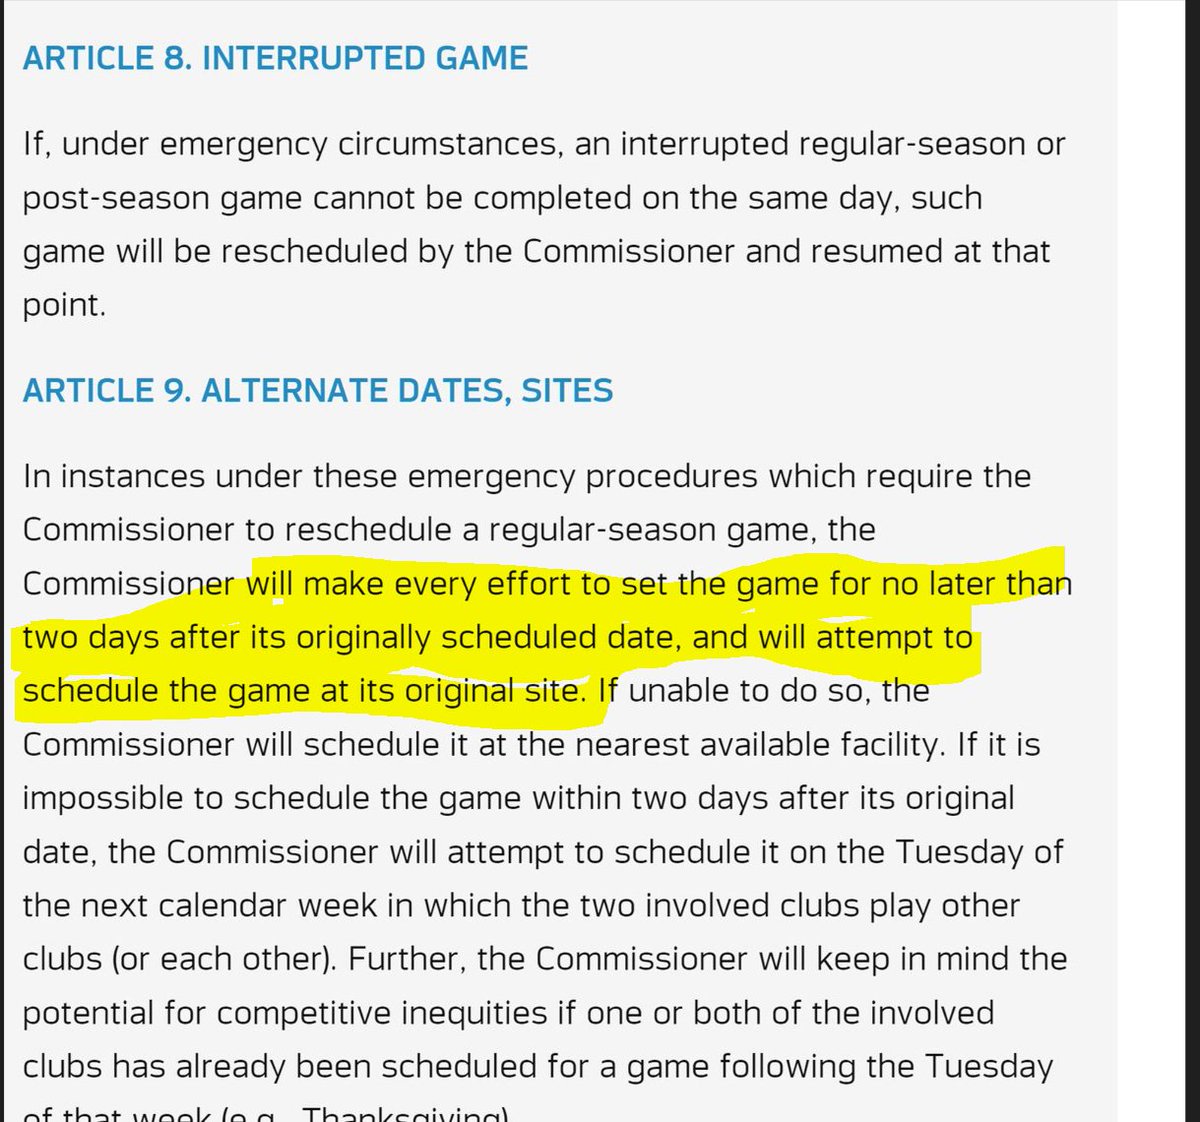 @jballerr2gs @gullenator @nflnetwork @MJAcostaTV I really need to explain how changing the rules after an event is unethical?  The NFL rules coverage game cancellations and had rules to follow.  Changing them after the event is UNETHICAL!  Geez, I really need to explain this?